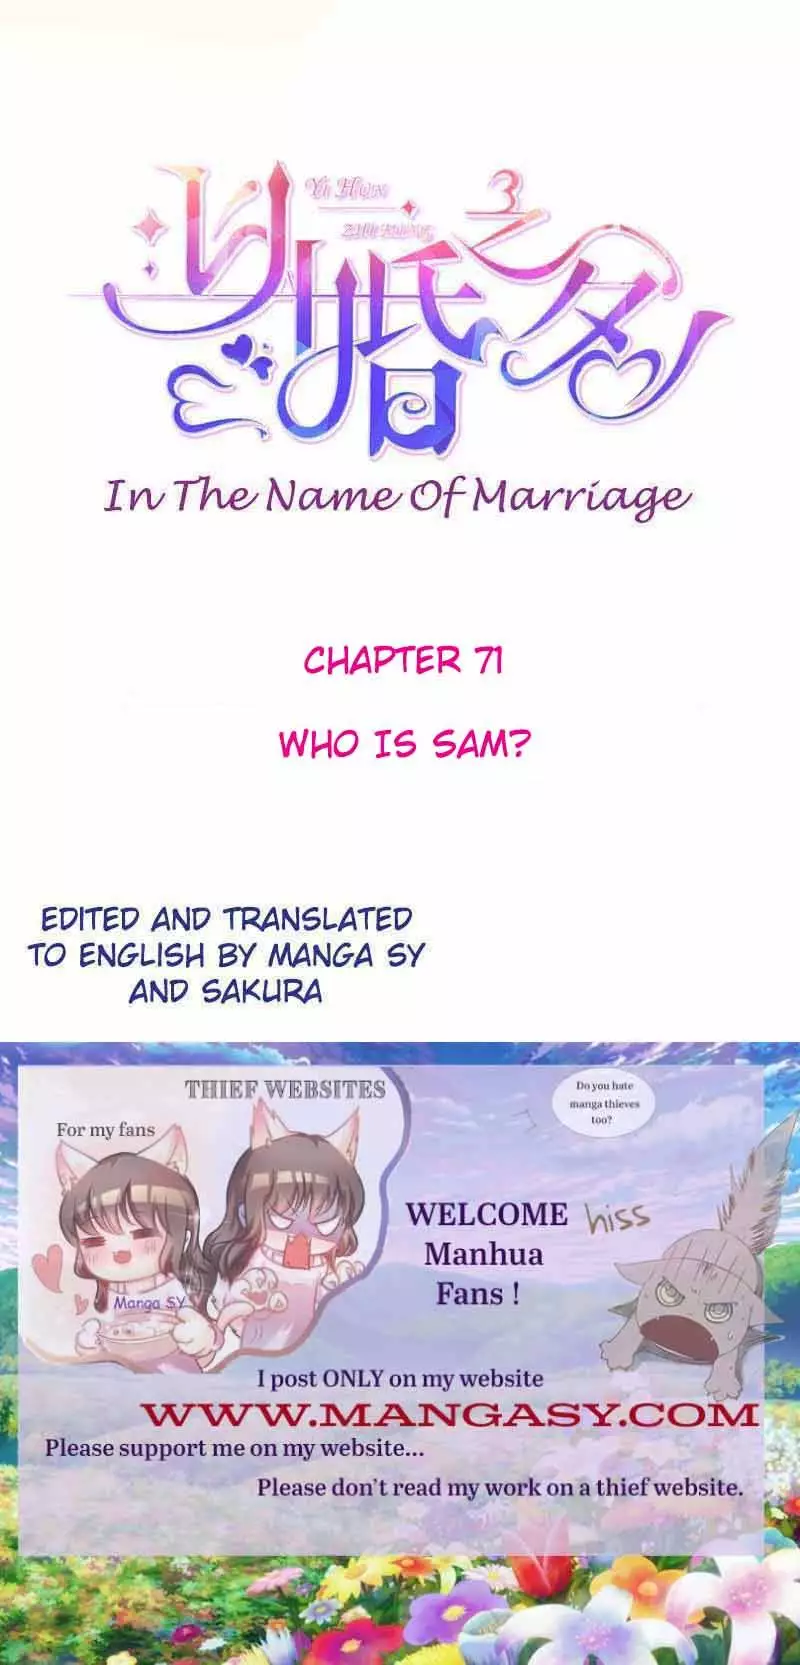 In The Name Of Marriage - 71 page 1-c8c418ee